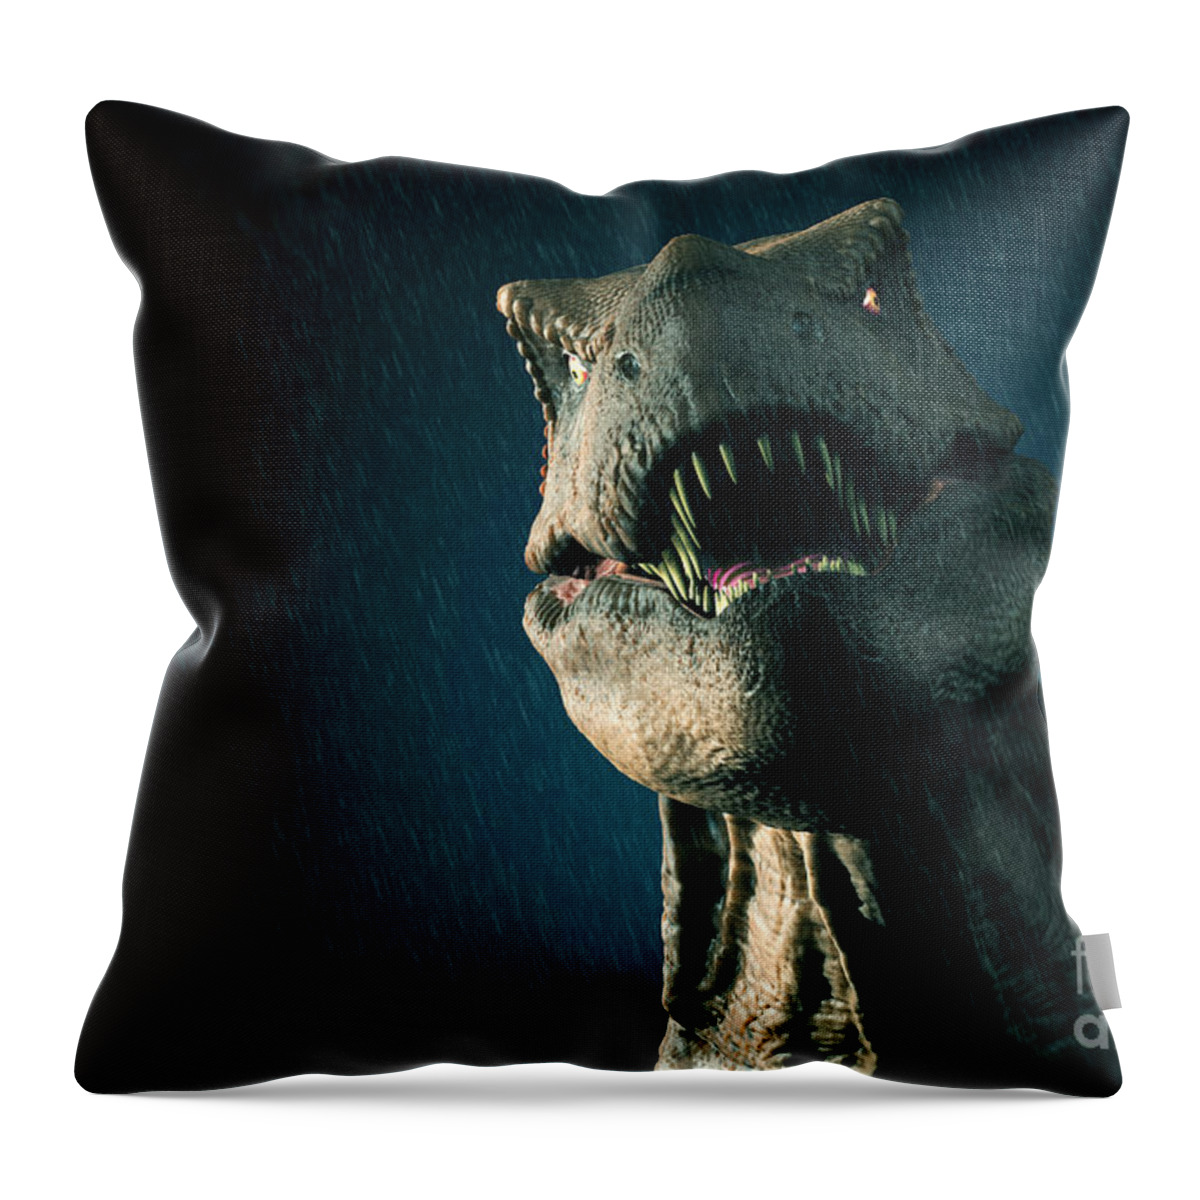 T-rex Throw Pillow featuring the photograph Tyrannosaurus Rex #2 by Science Picture Co